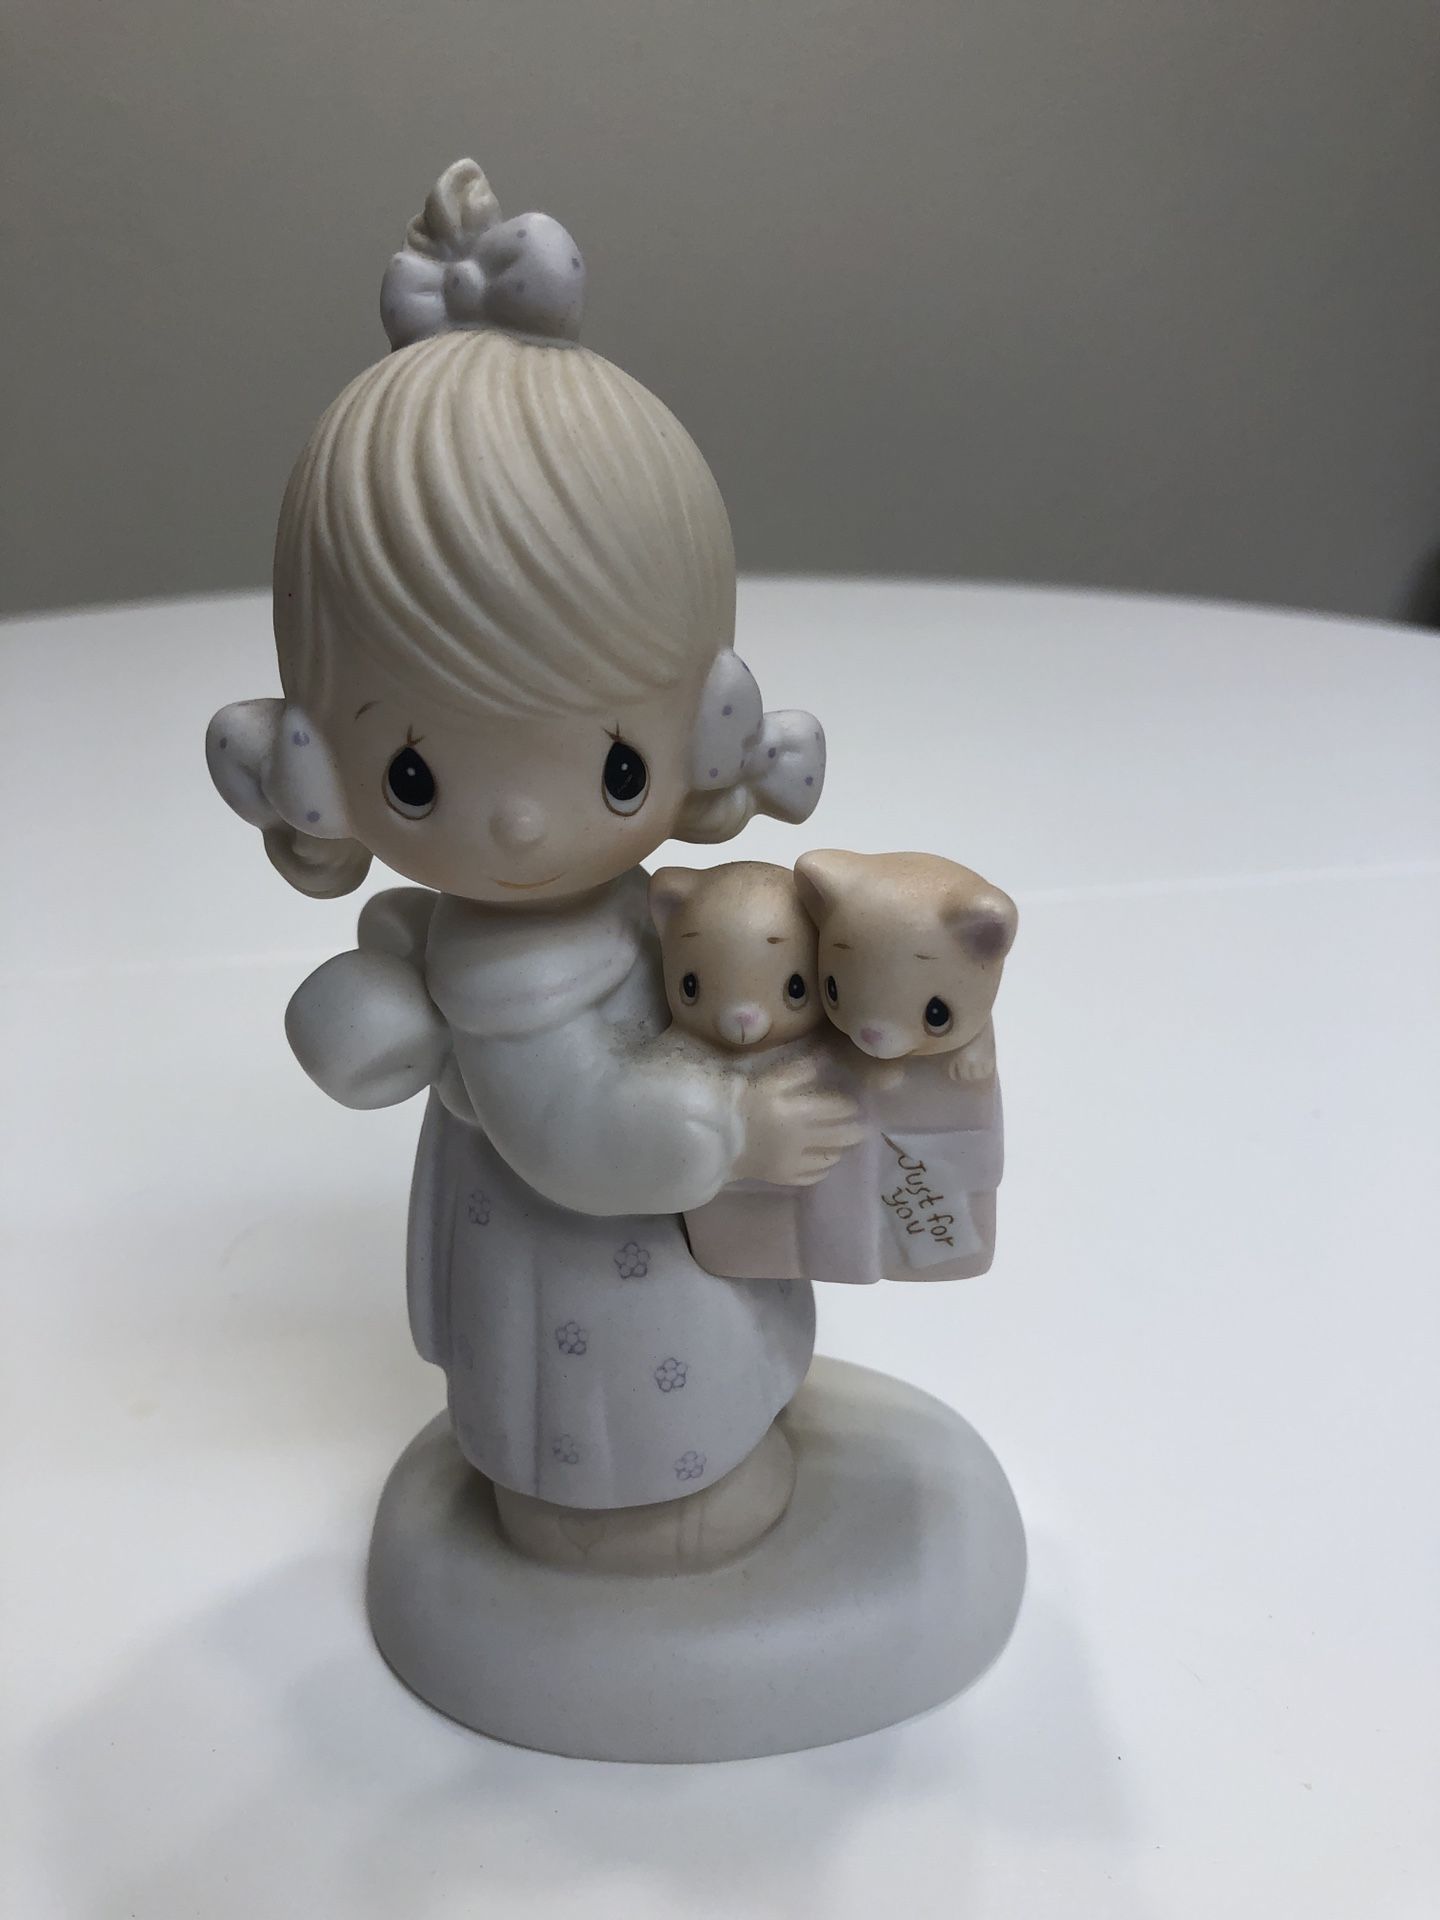 1979 Precious Moments Figurine “To Thee With Love”